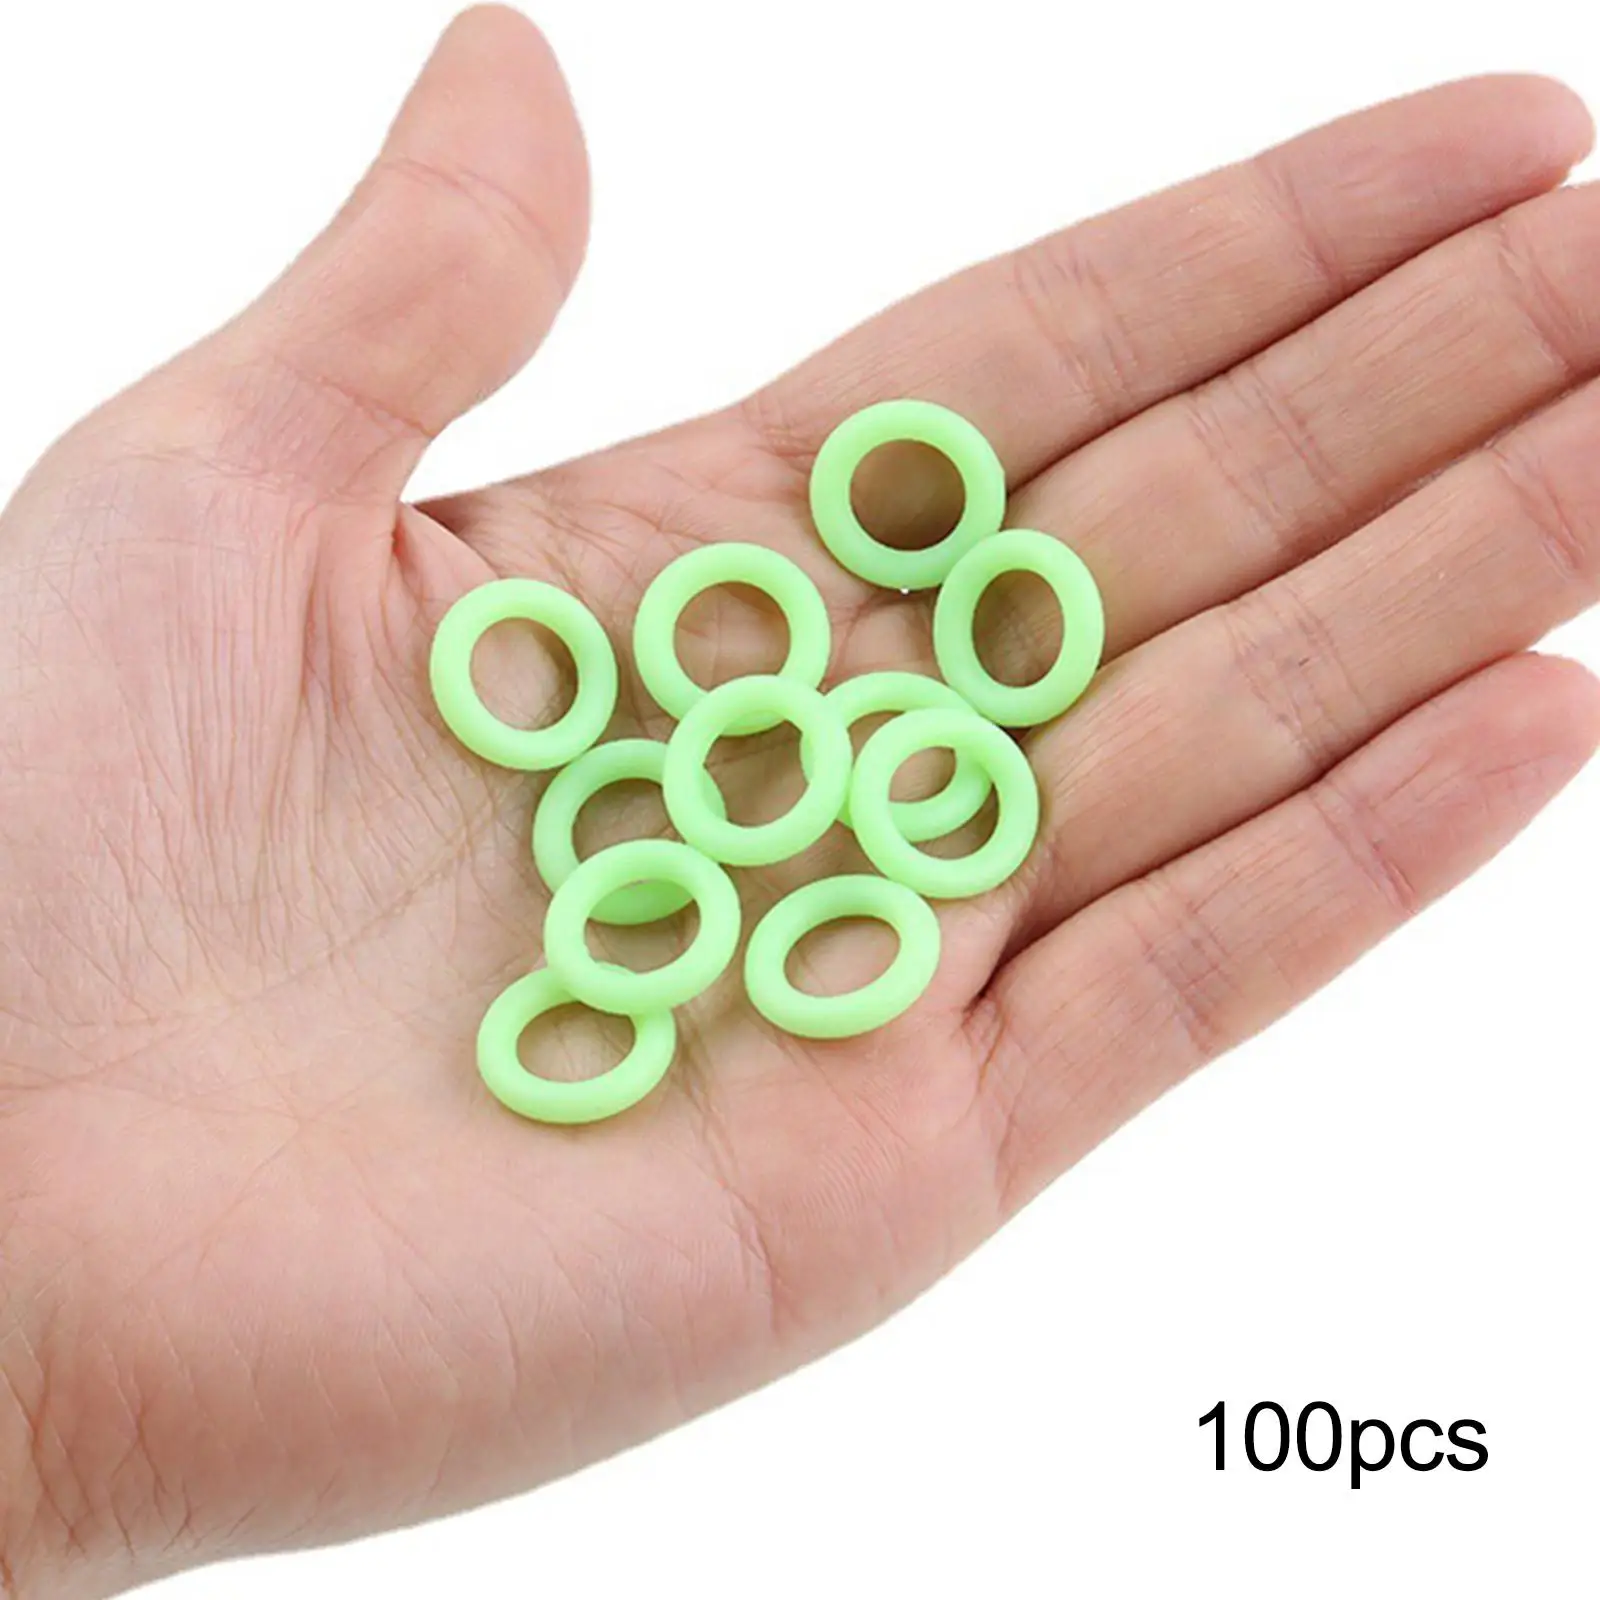 100Pcs Tent Stake Rings Luminous Silicone O Rings Tent Stake Accessories